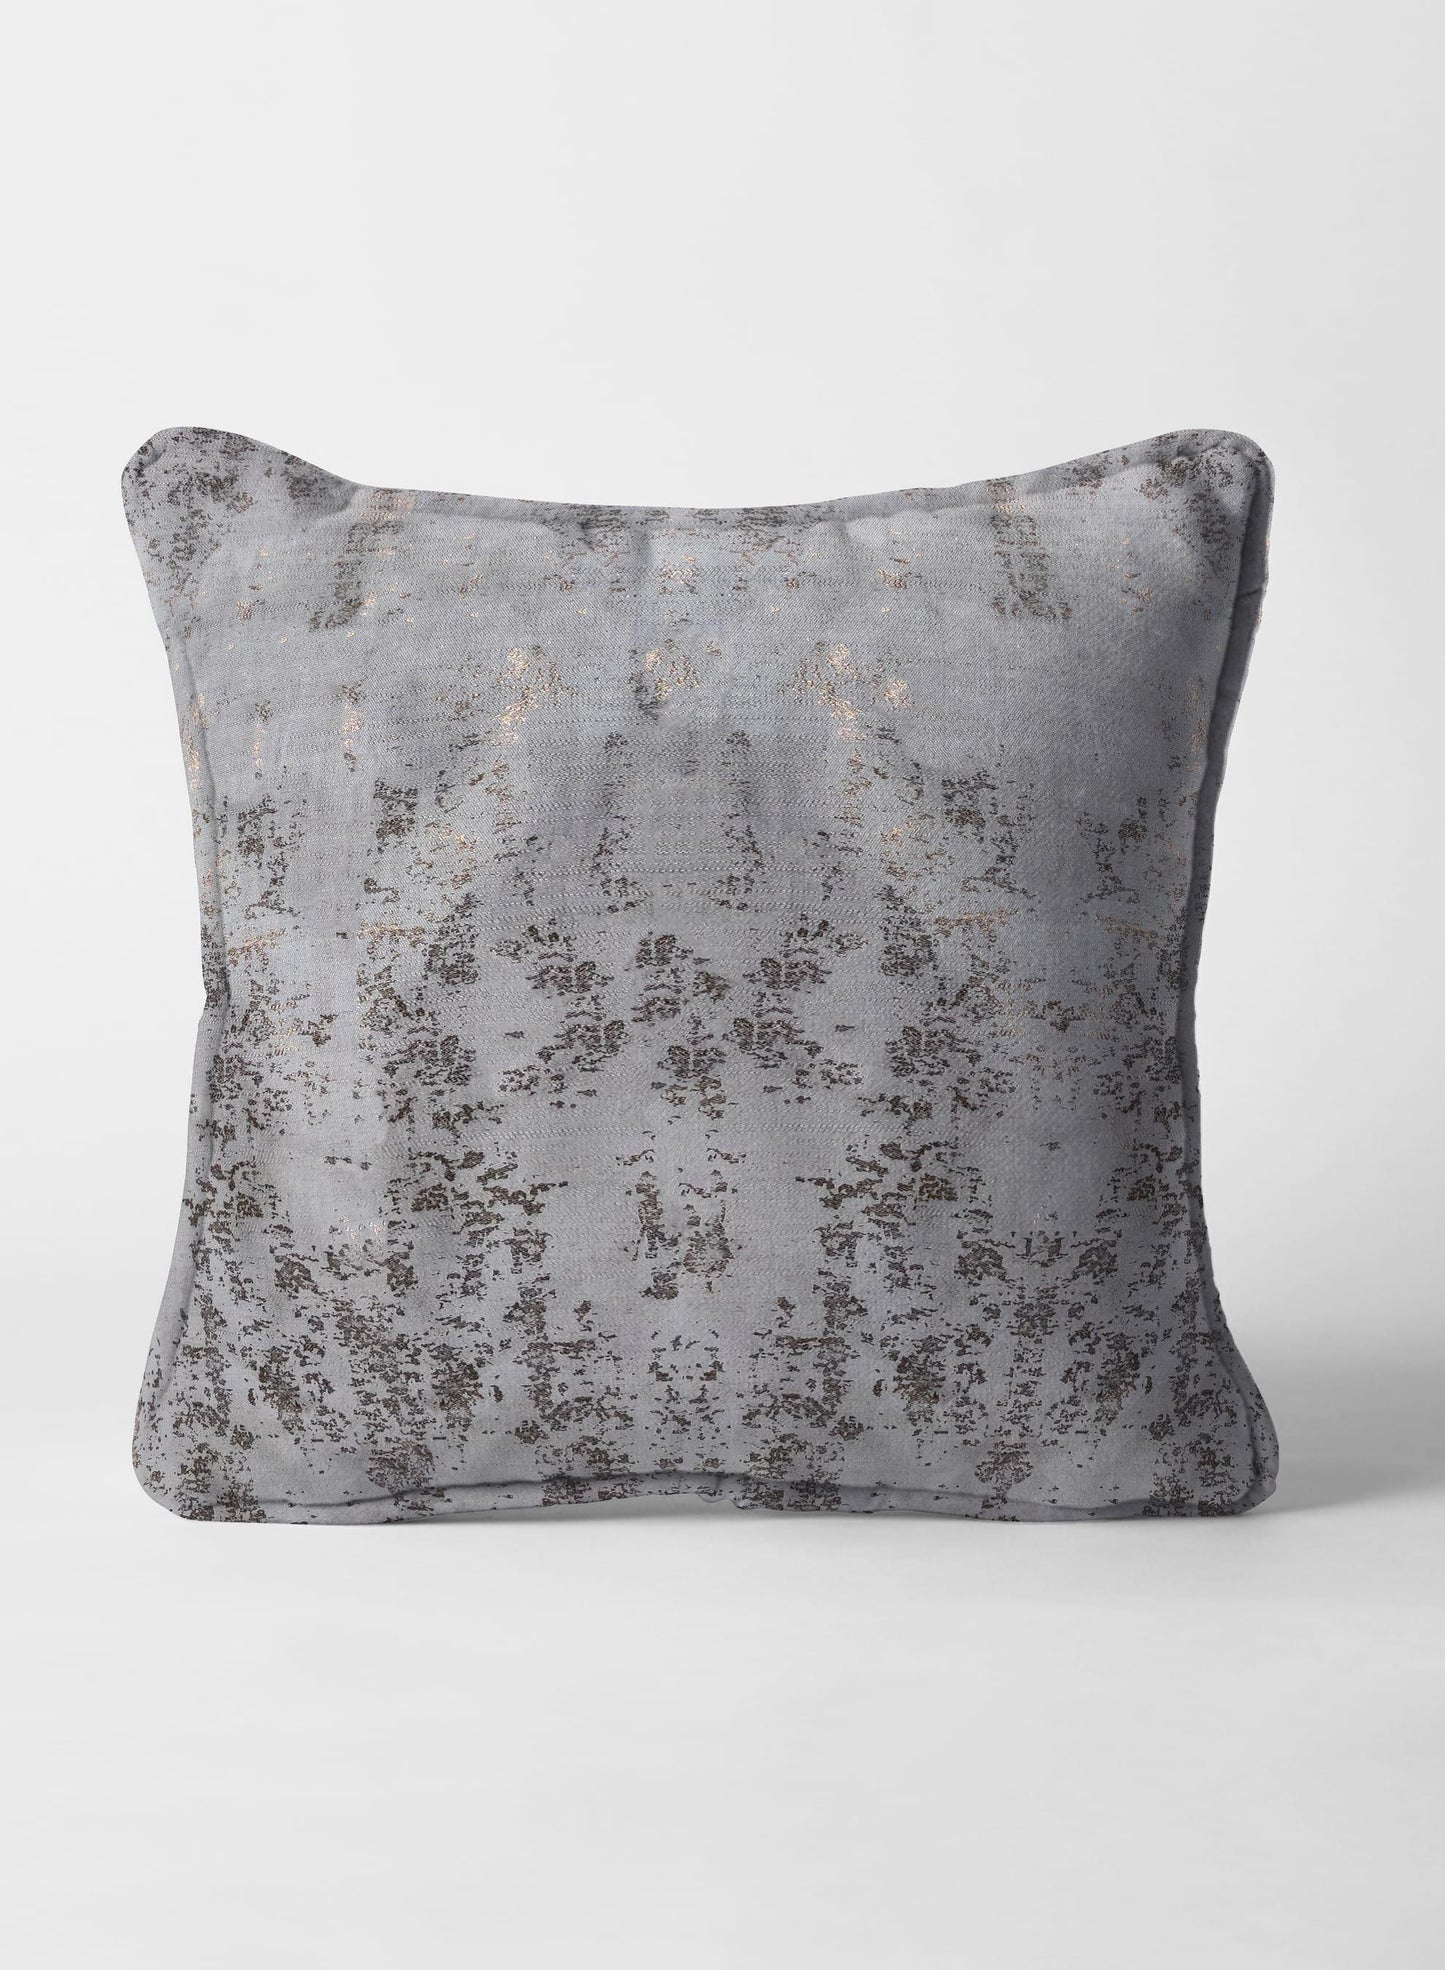 Lyon Cushion Cover | Lavender Blue - Home Crayonss